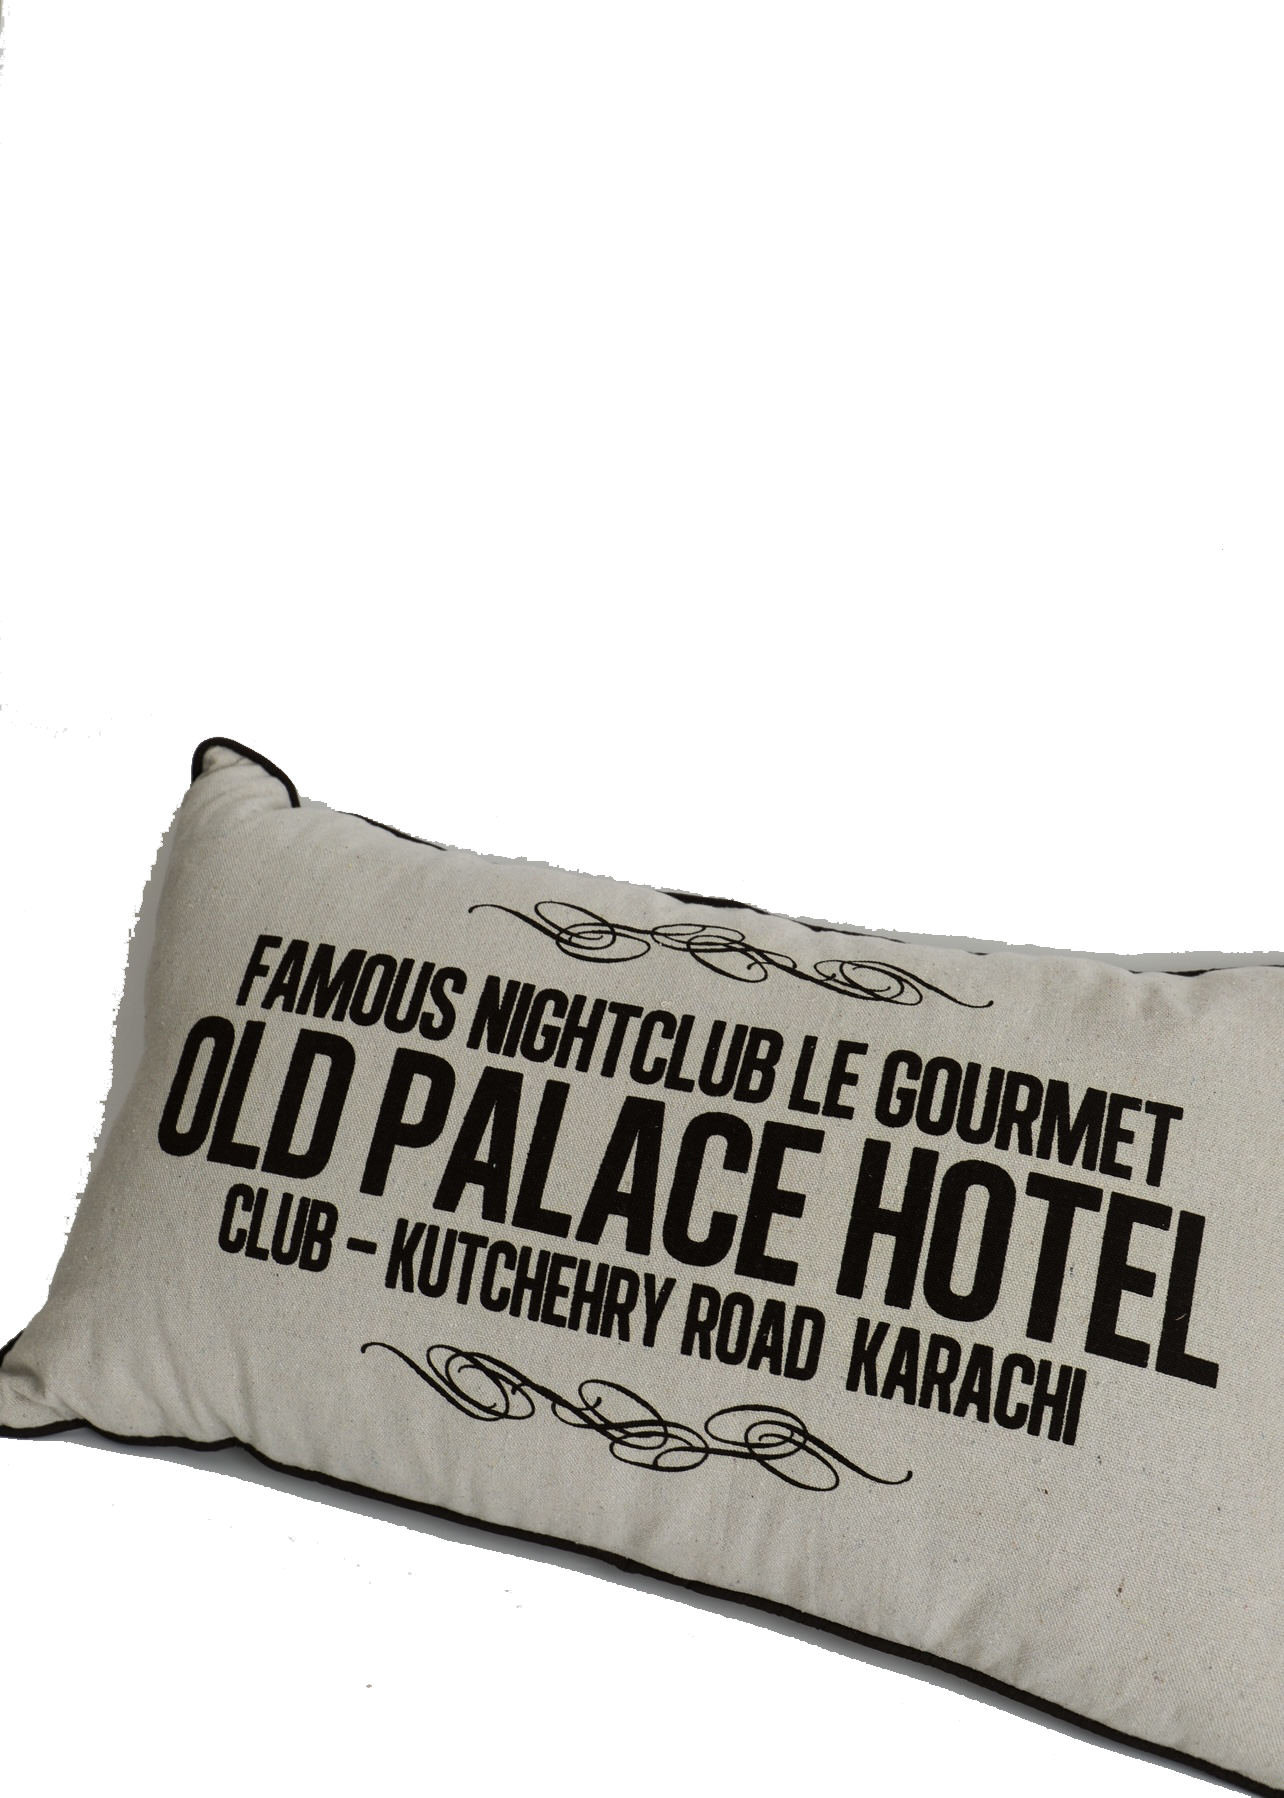 Add a touch of nostalgia to your home with this unique cushion! It's printed with 'Old Palace Hotel' in bold lettering that will transport you back in time. 